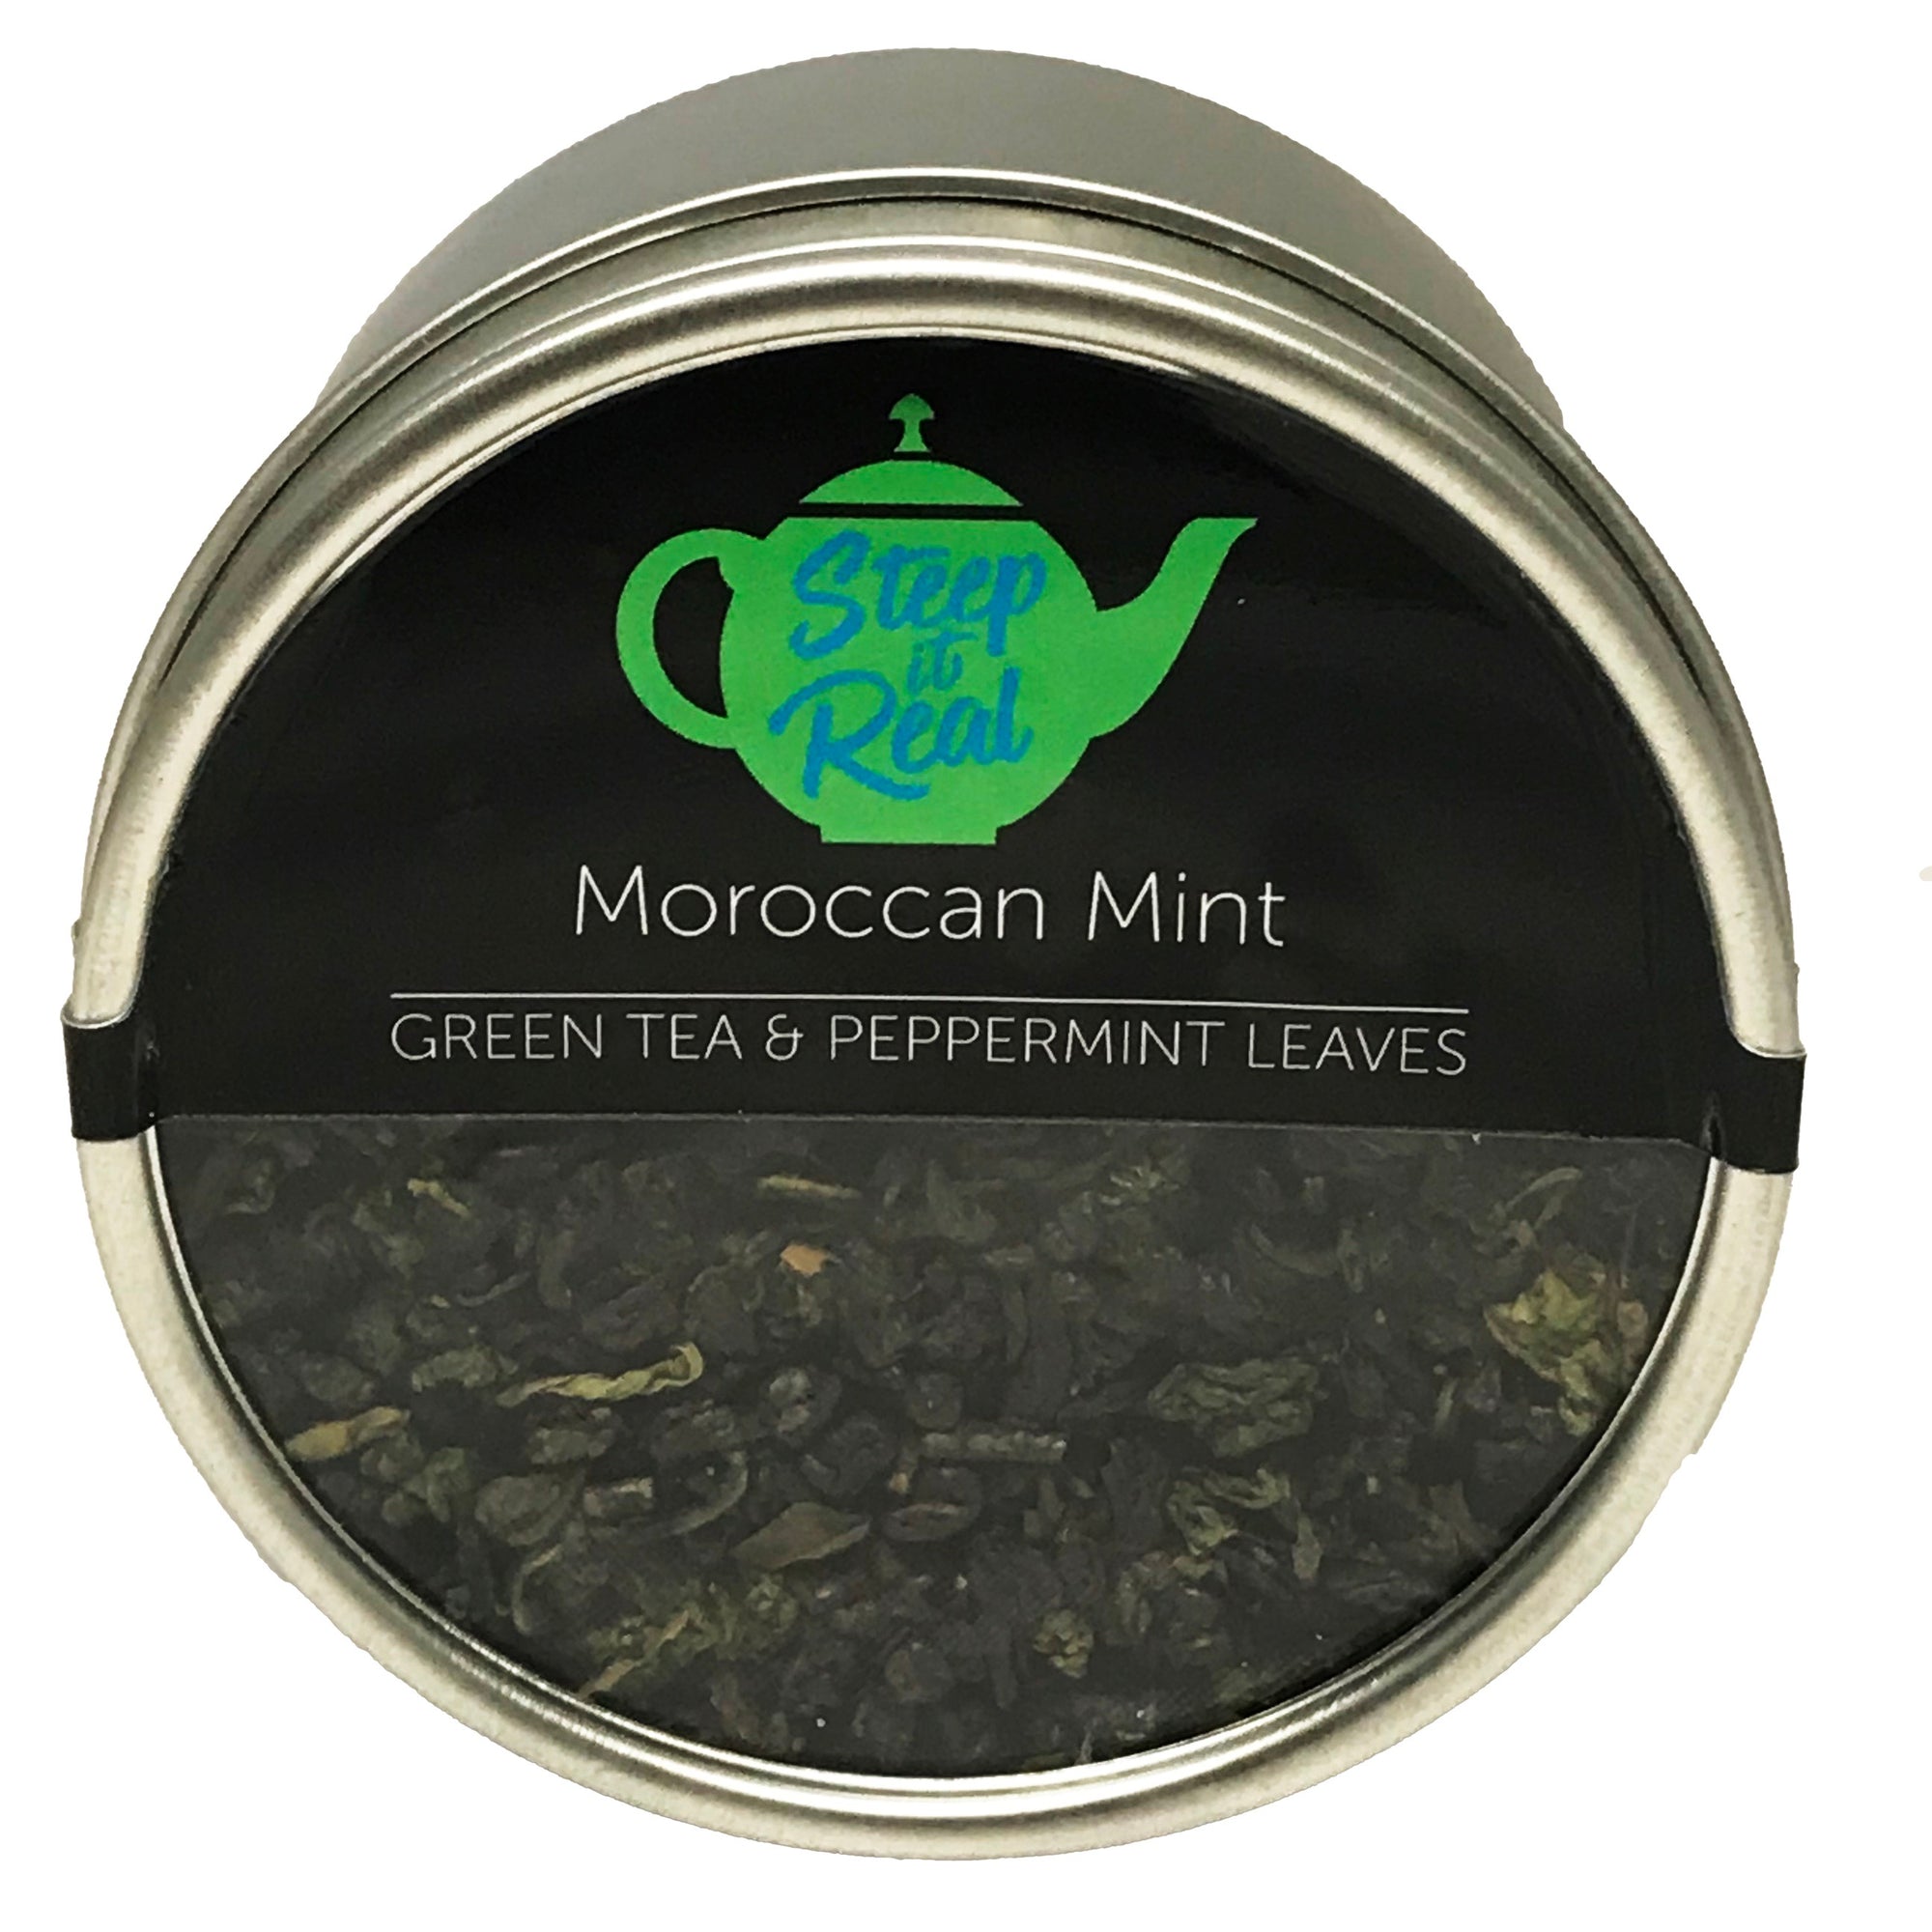 Moroccan Mint - I Have a Bean